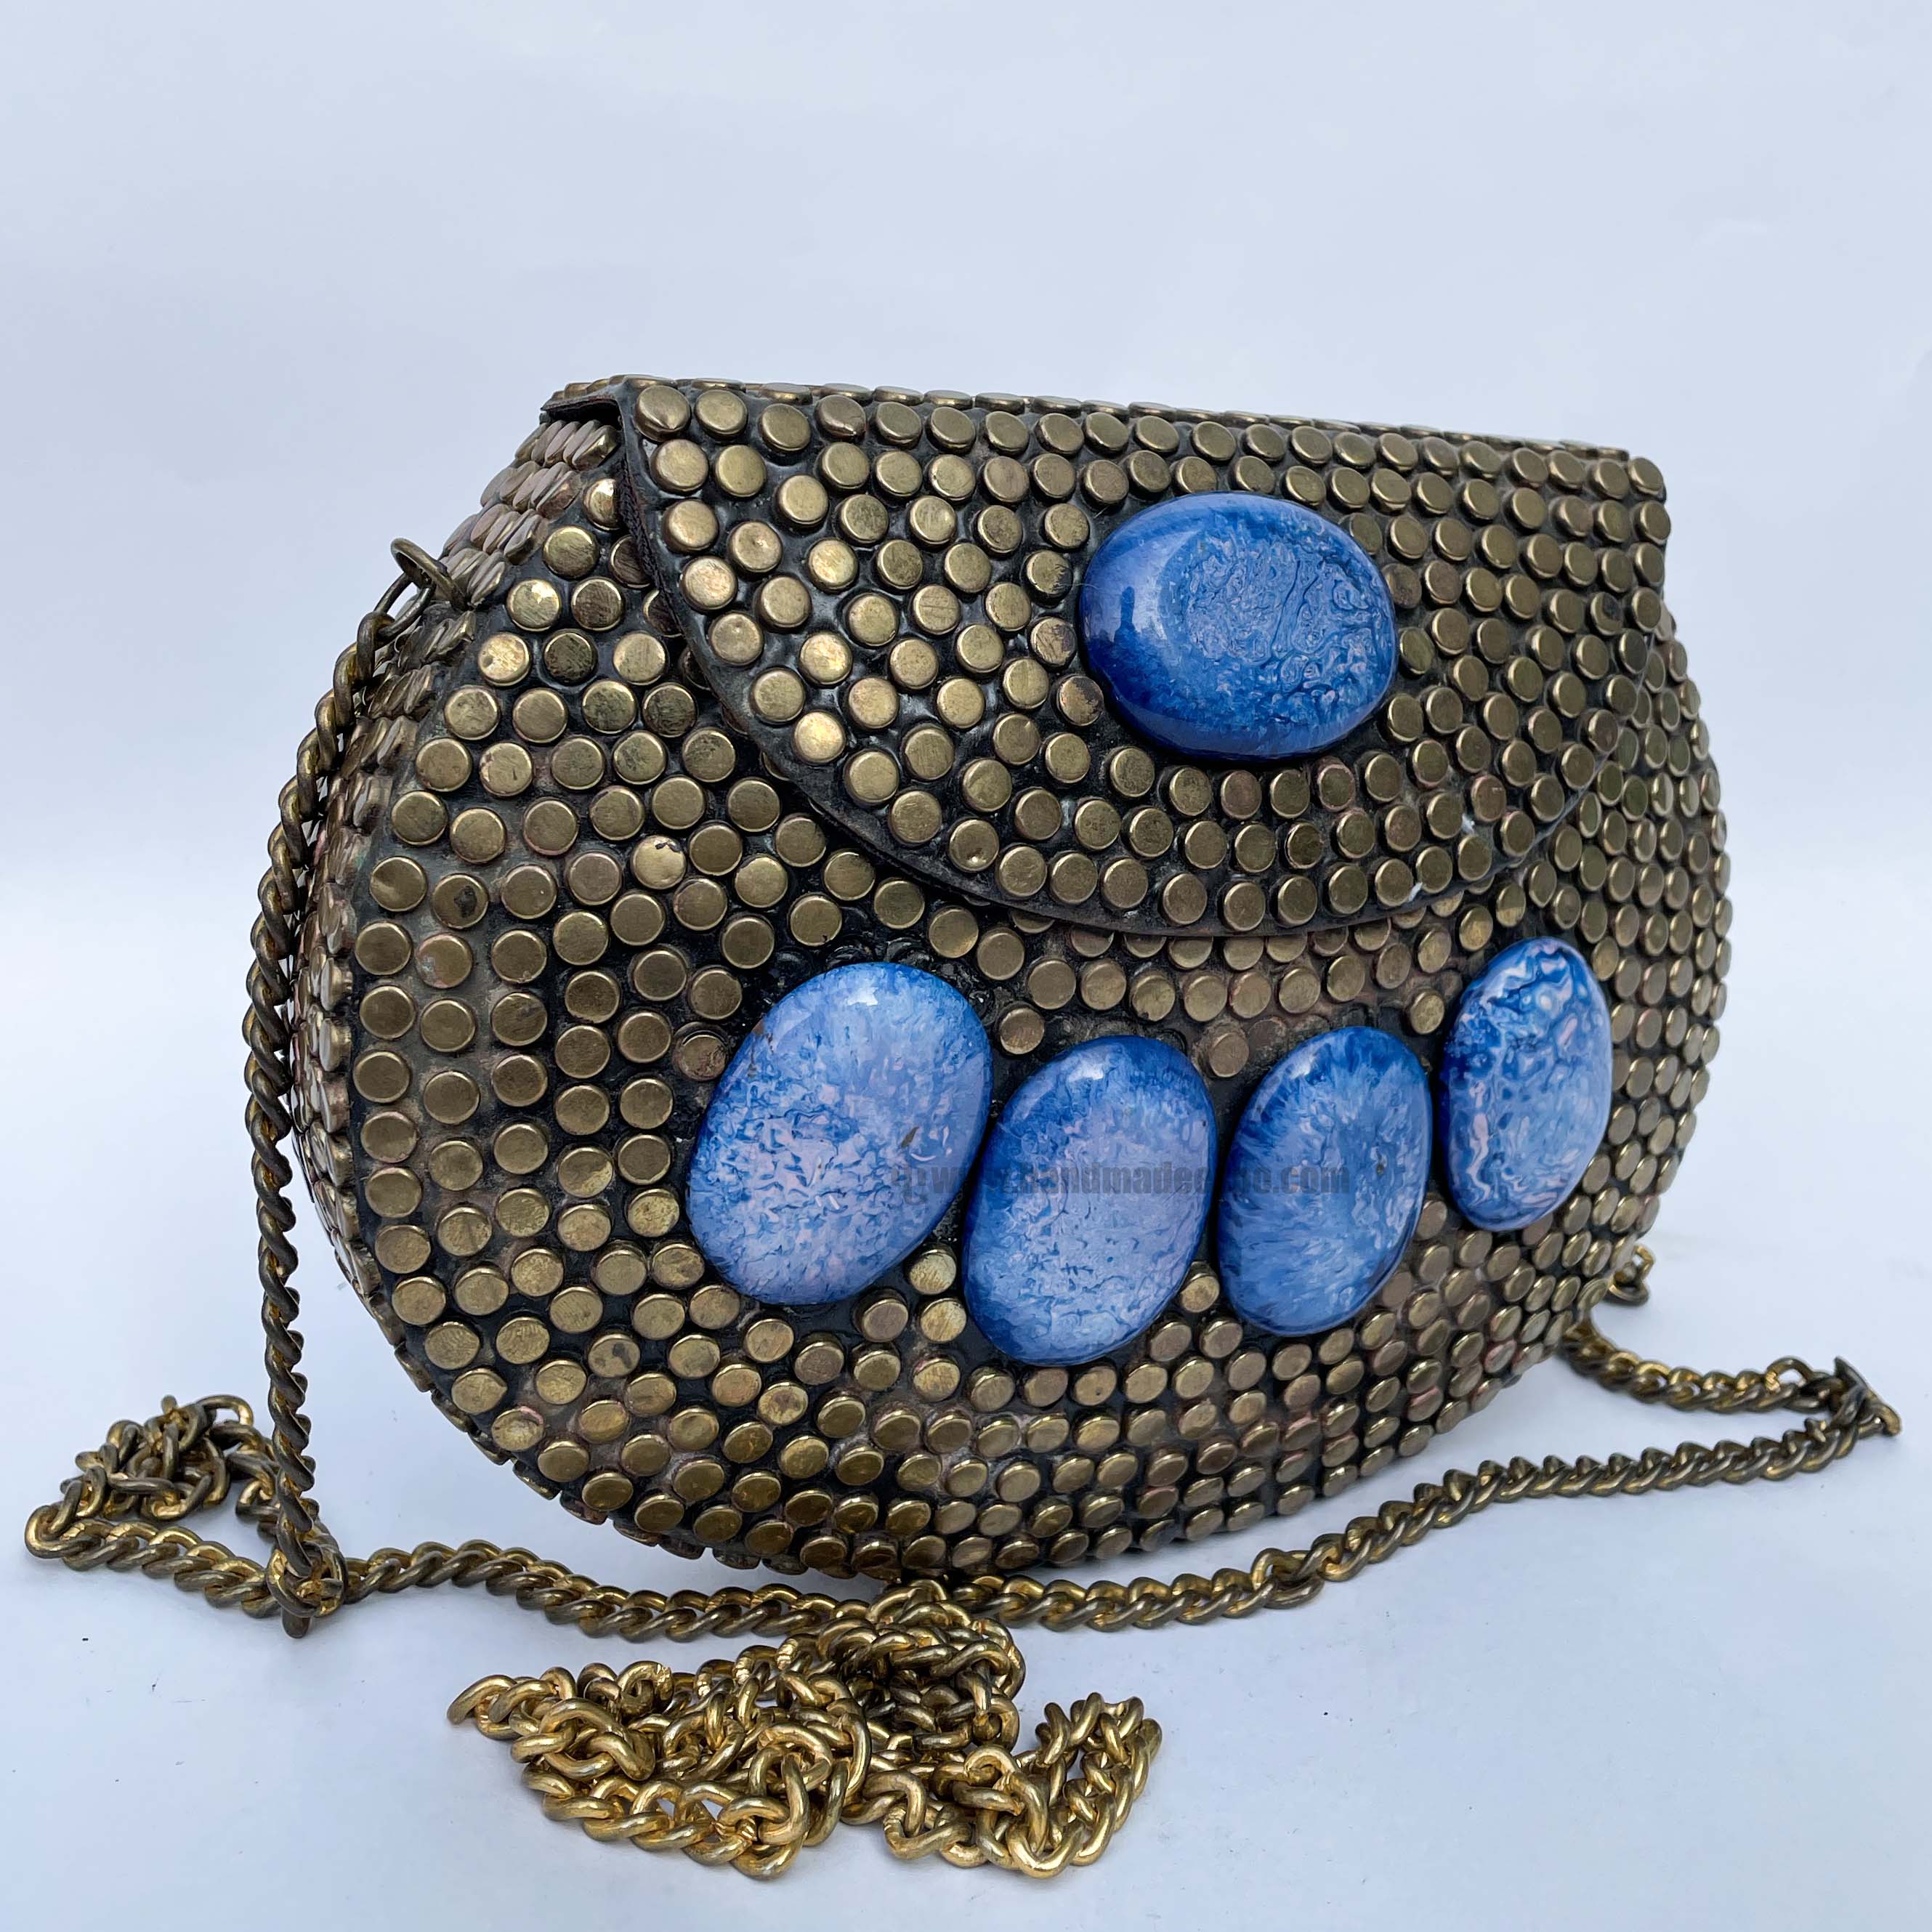 Nepali Handmade Big Ladies Bag With stone Setting, metal, blue And Golden Color